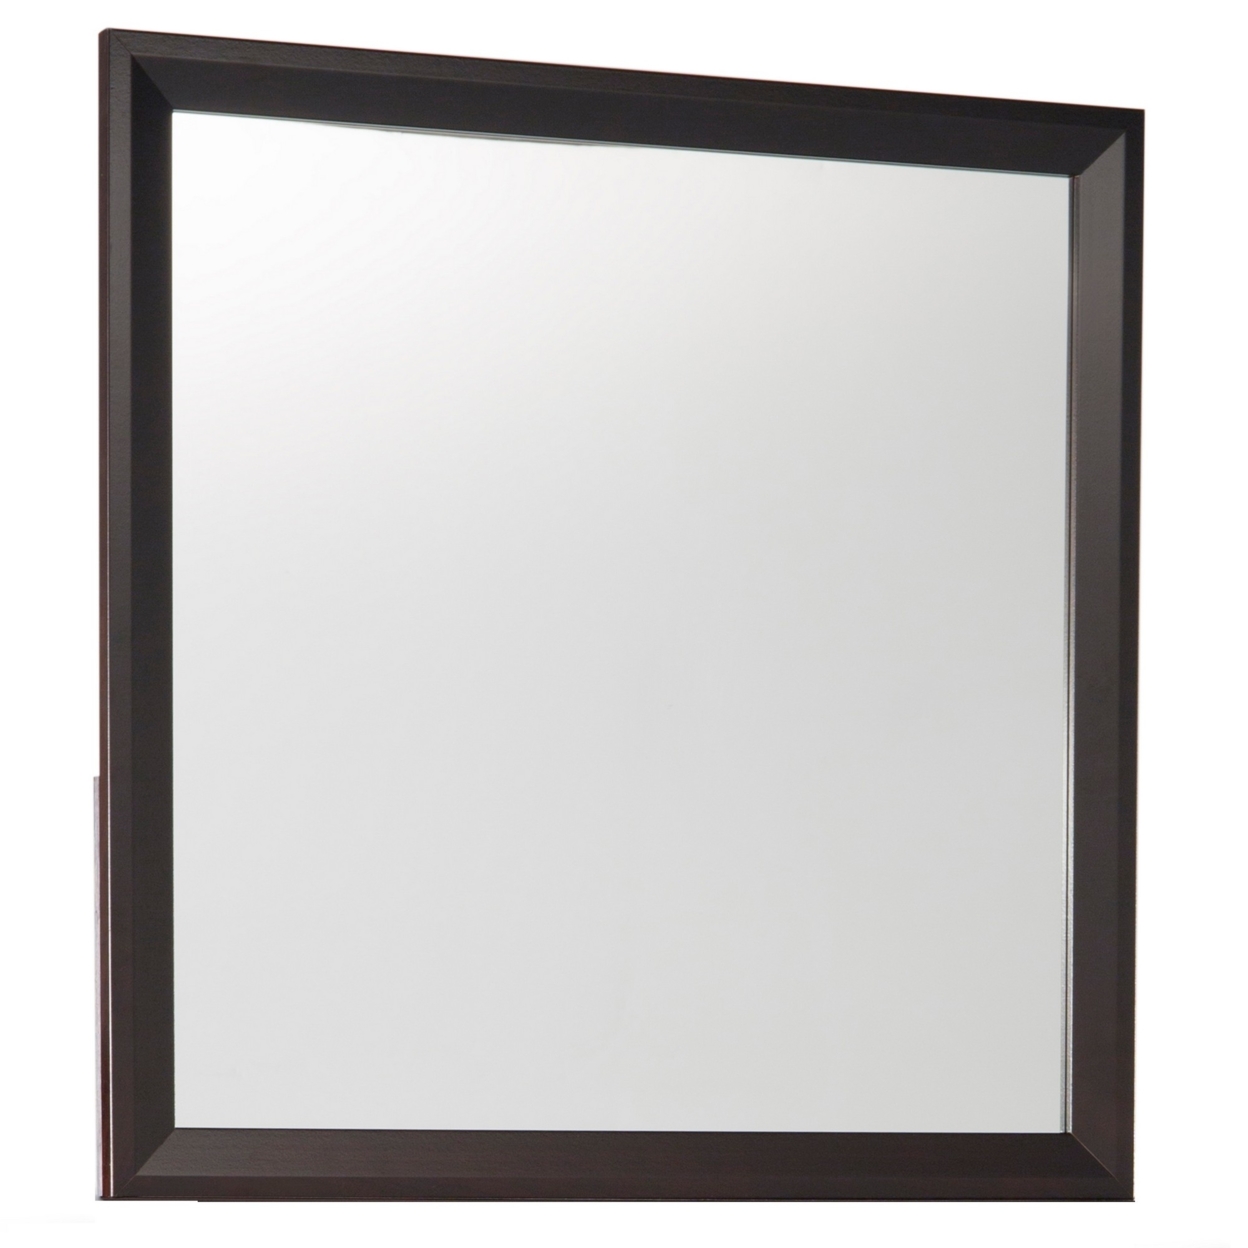 Square Wooden Frame Mirror With Mounting Hardware, Cherry Brown And Silver- Saltoro Sherpi